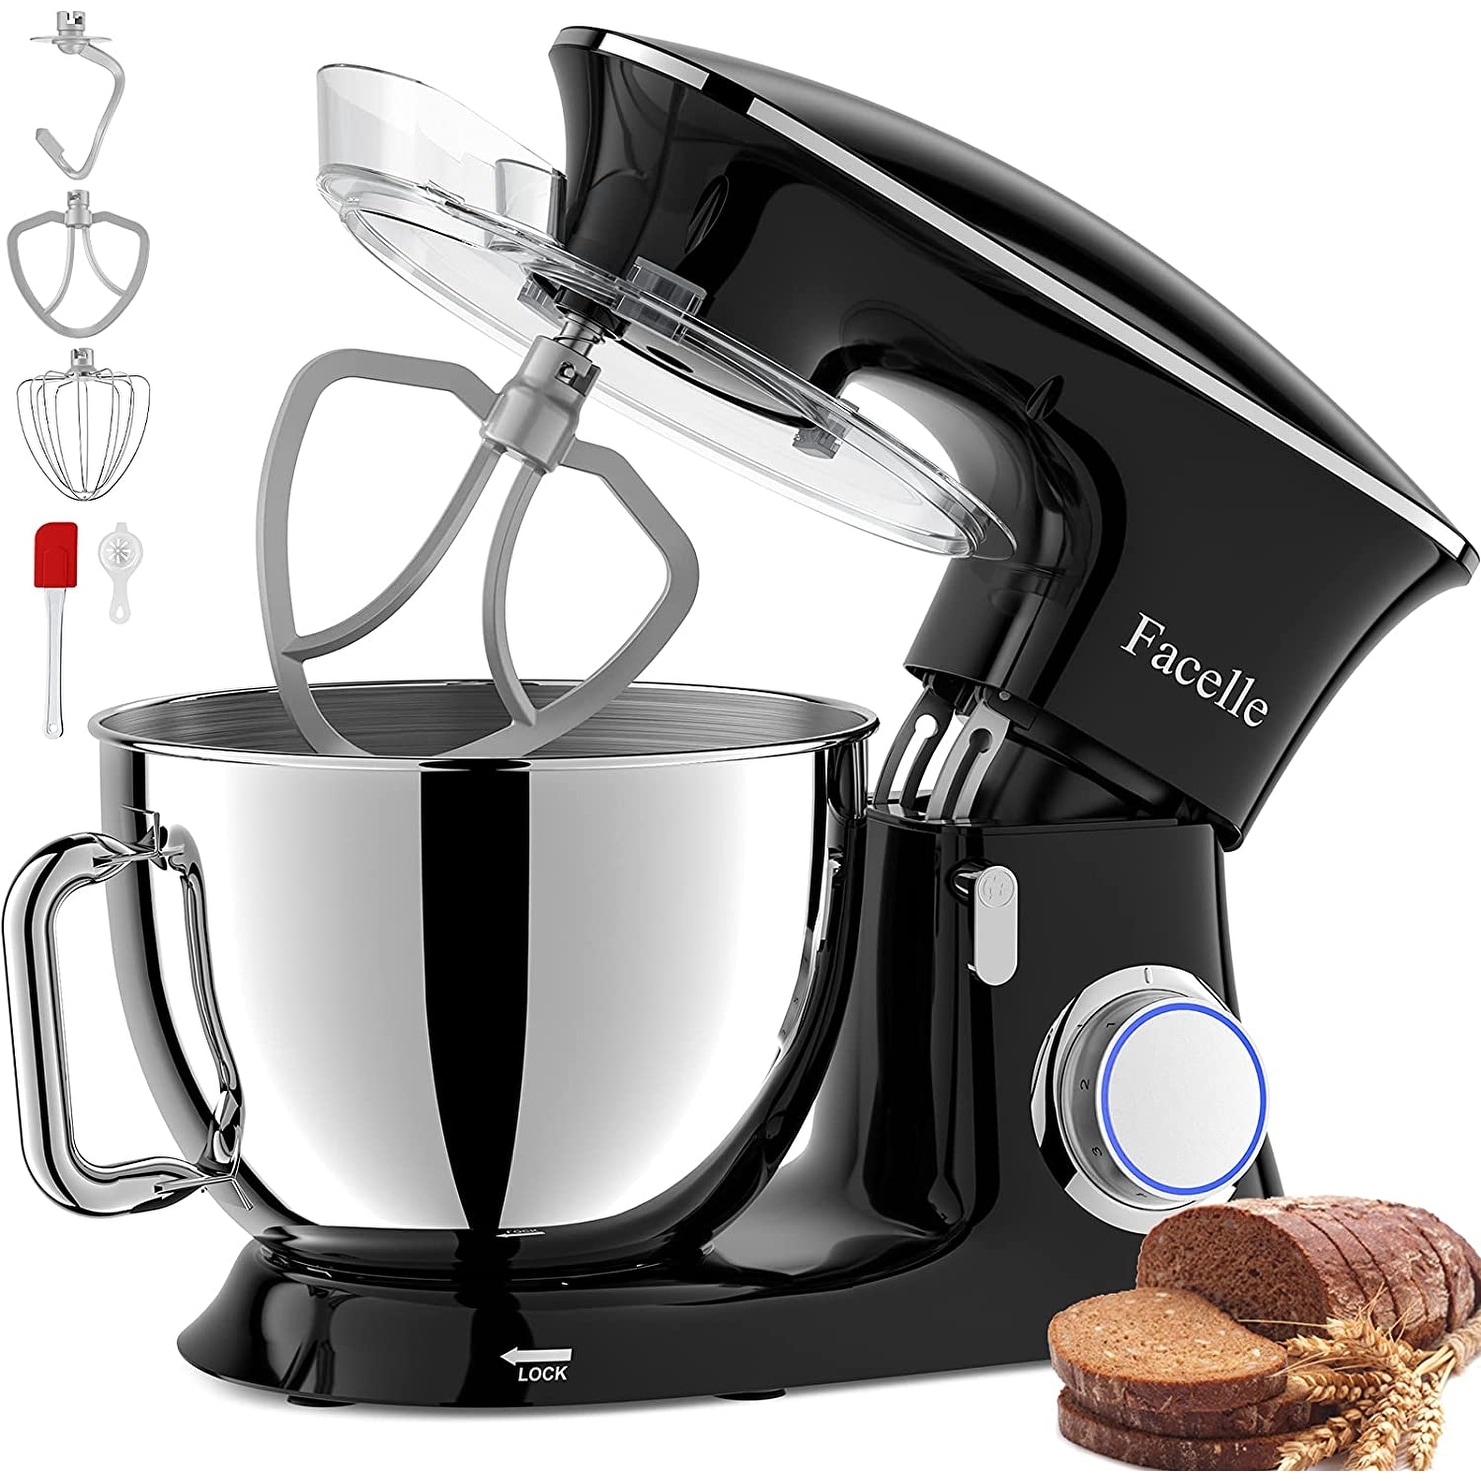 Stand Mixer 7.5QT 10-Speed 660W Tilt-Head Kitchen Electric Food Cake Mixer  with Stainless Steel Bowl, Whisk, Dough Hook, Beater & Splash Guard